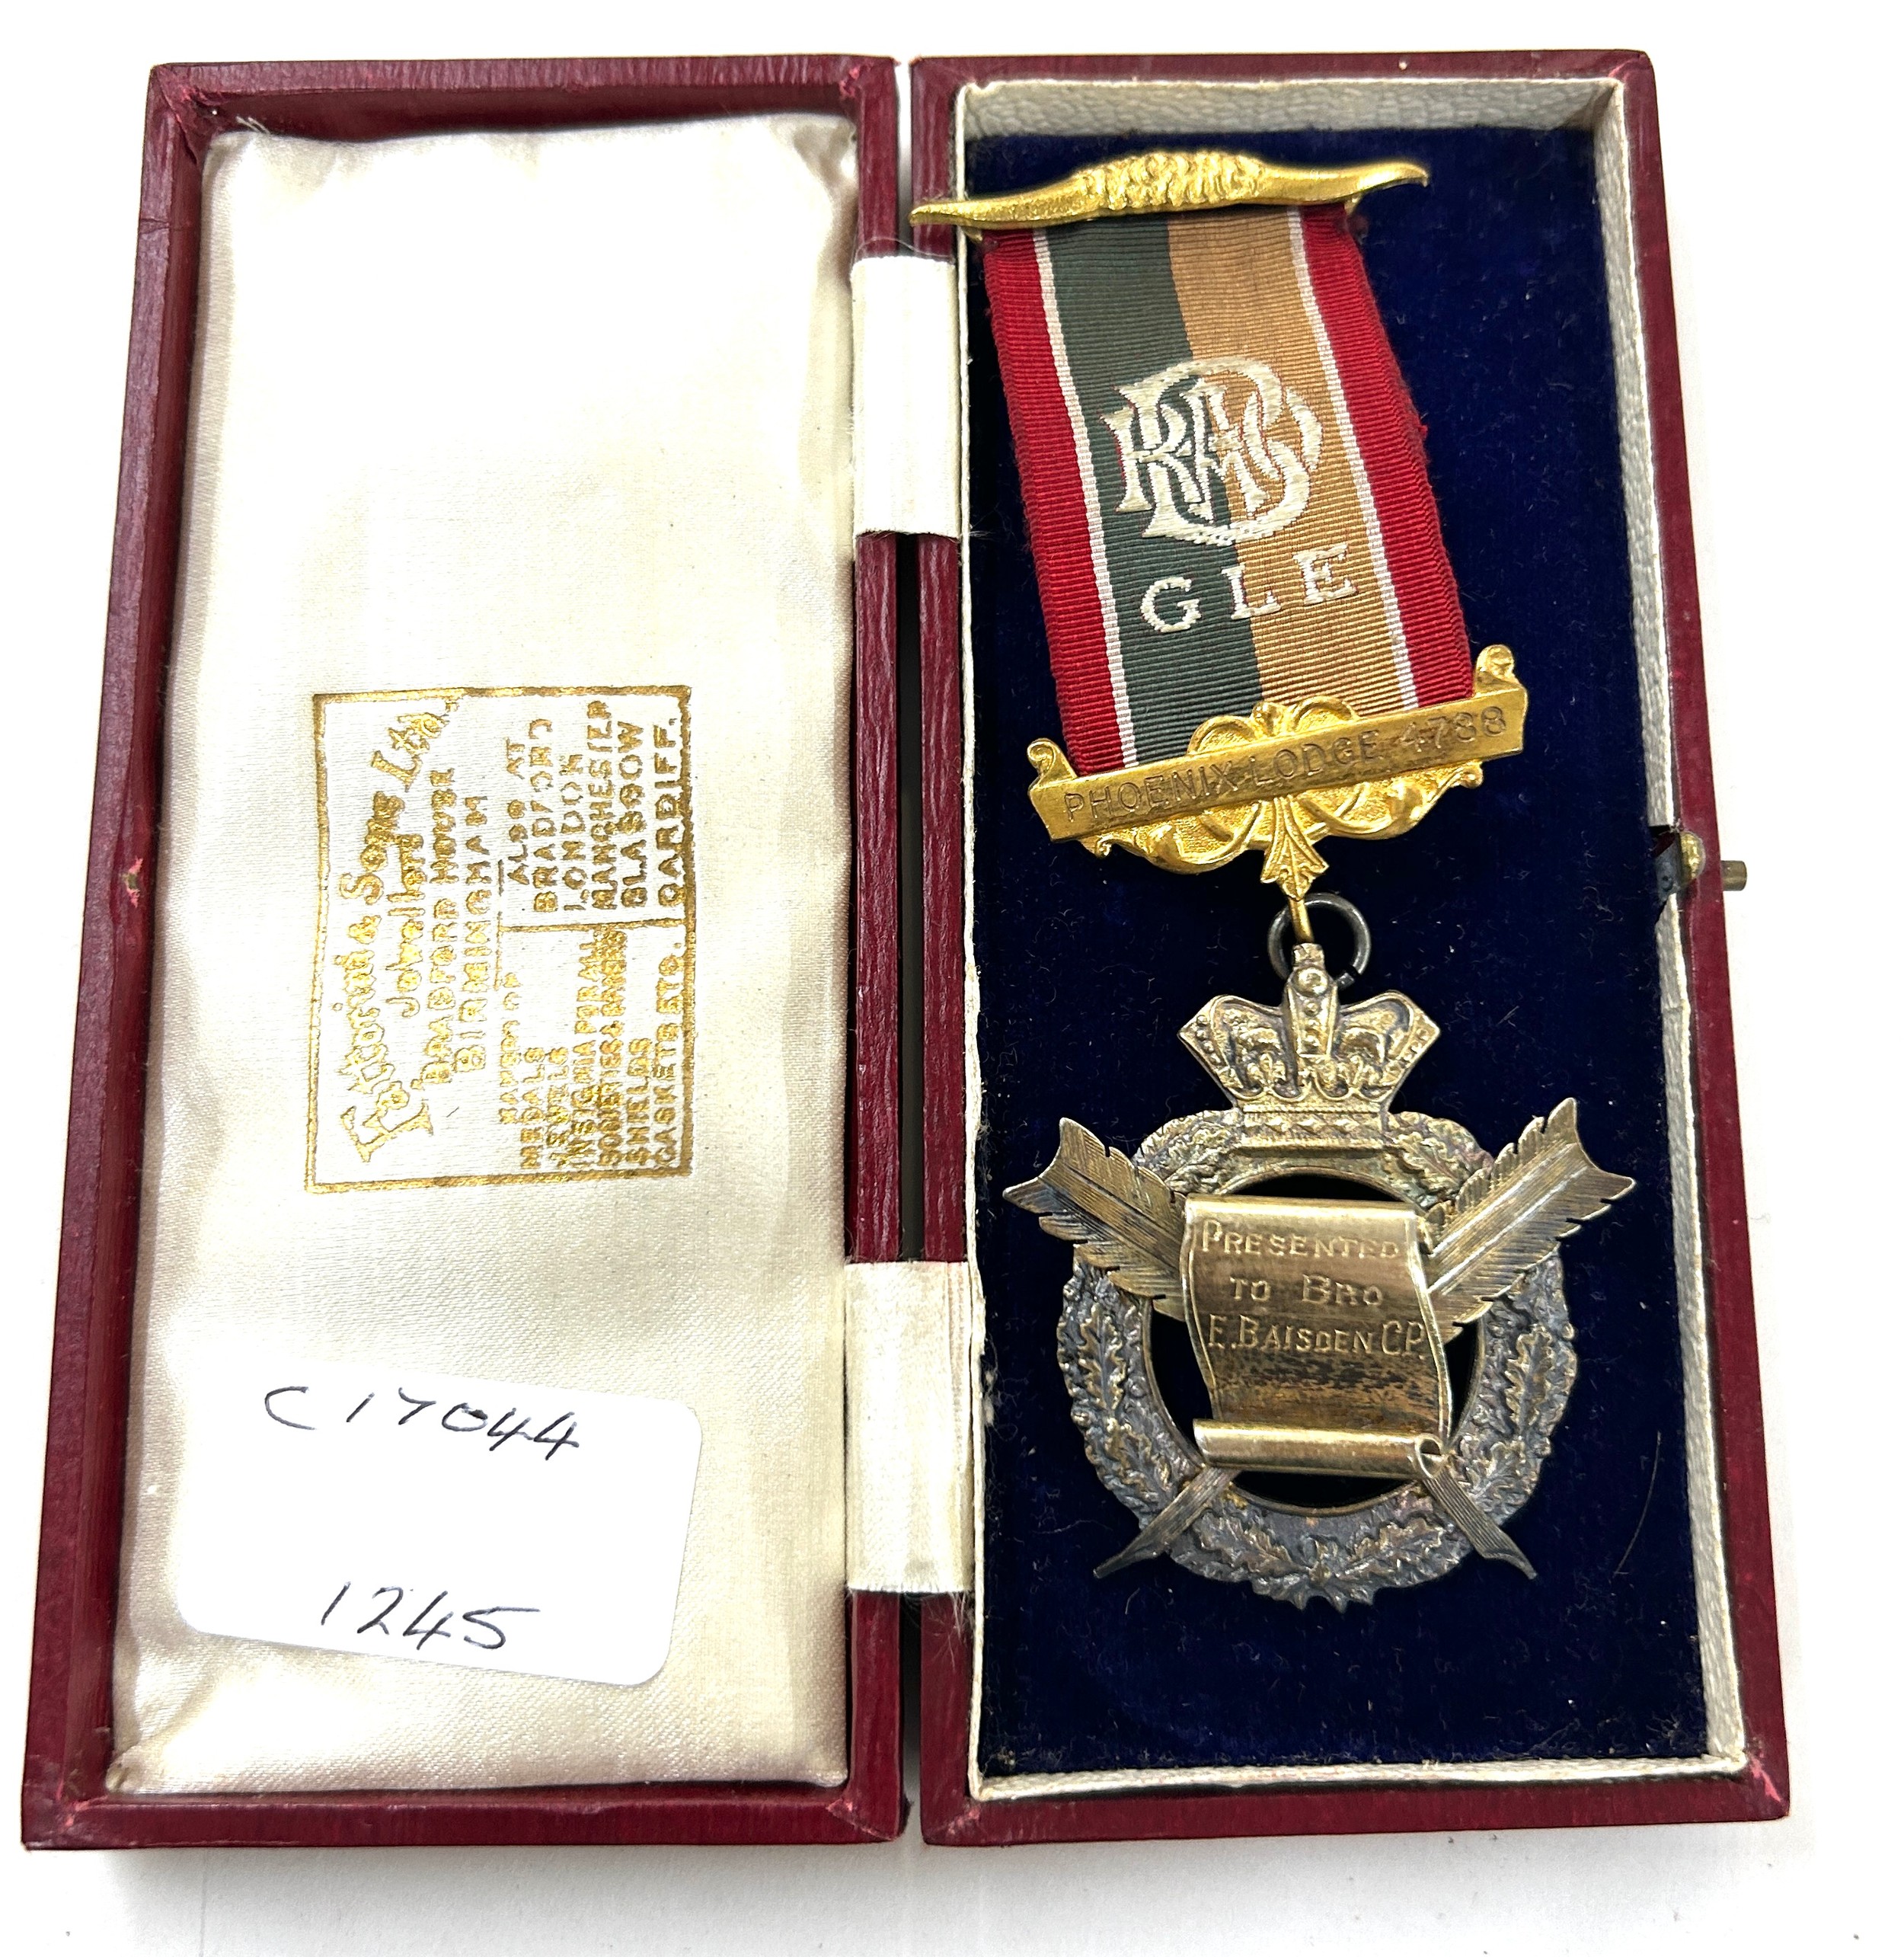 Boxed masonic silver service rendered medal june 29th 1928 presented to Bro E. Baisden by the